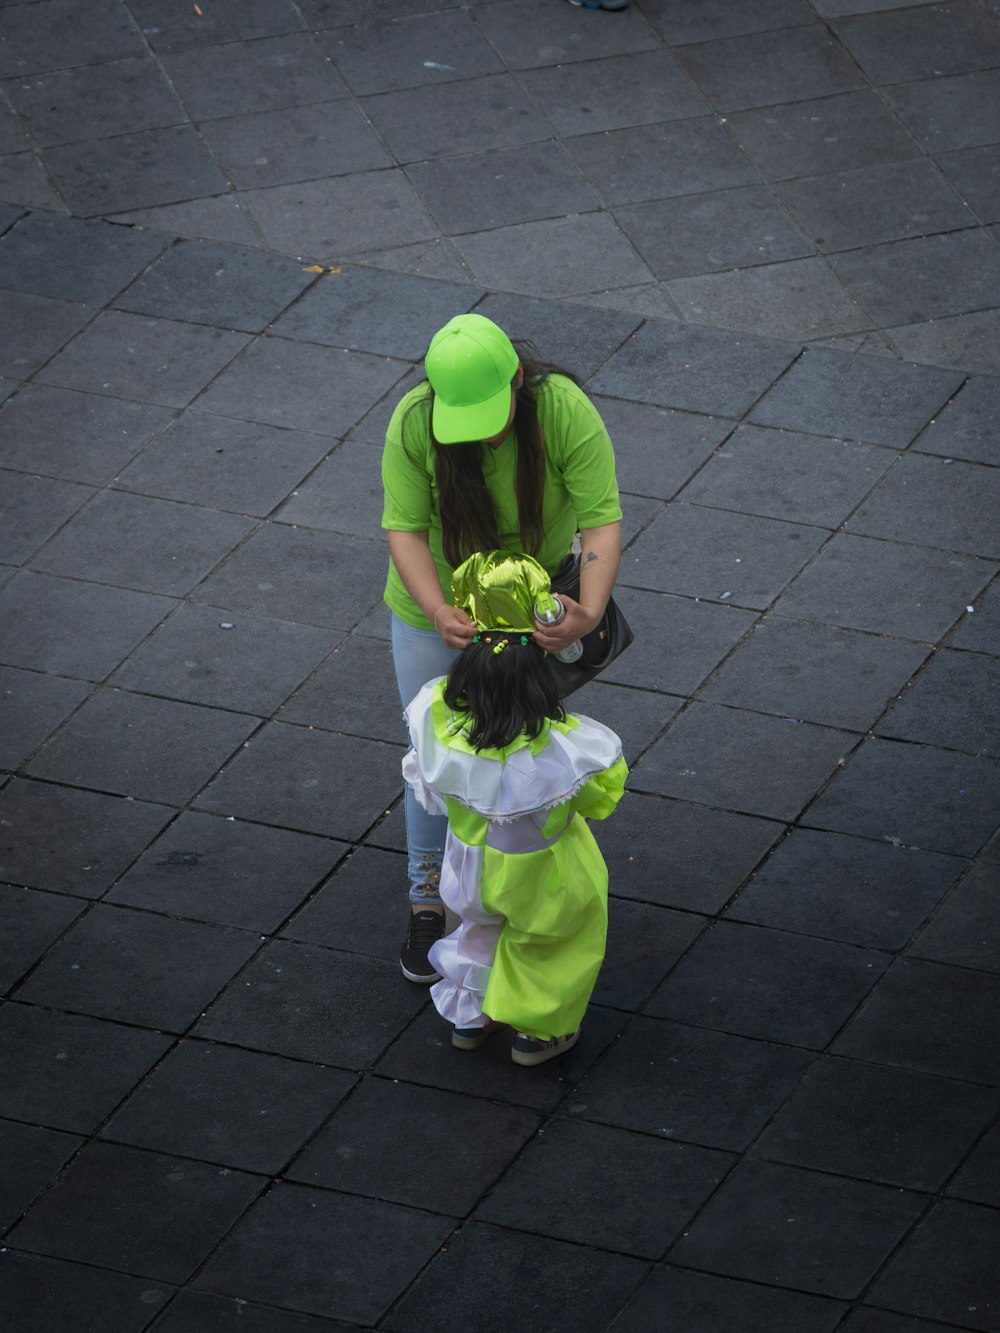 a man in a green hat and a woman in a green dress